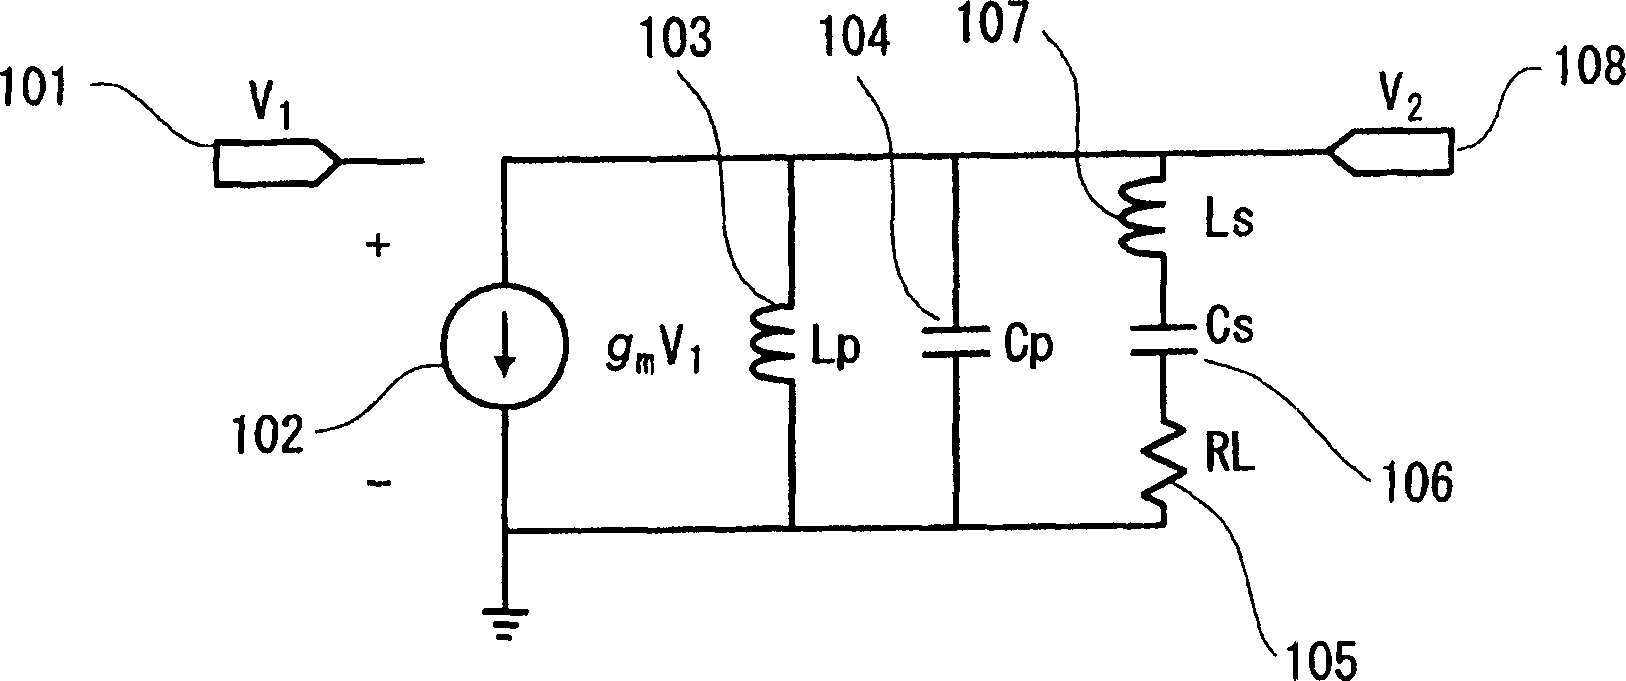 Amplifier and communication apparatus